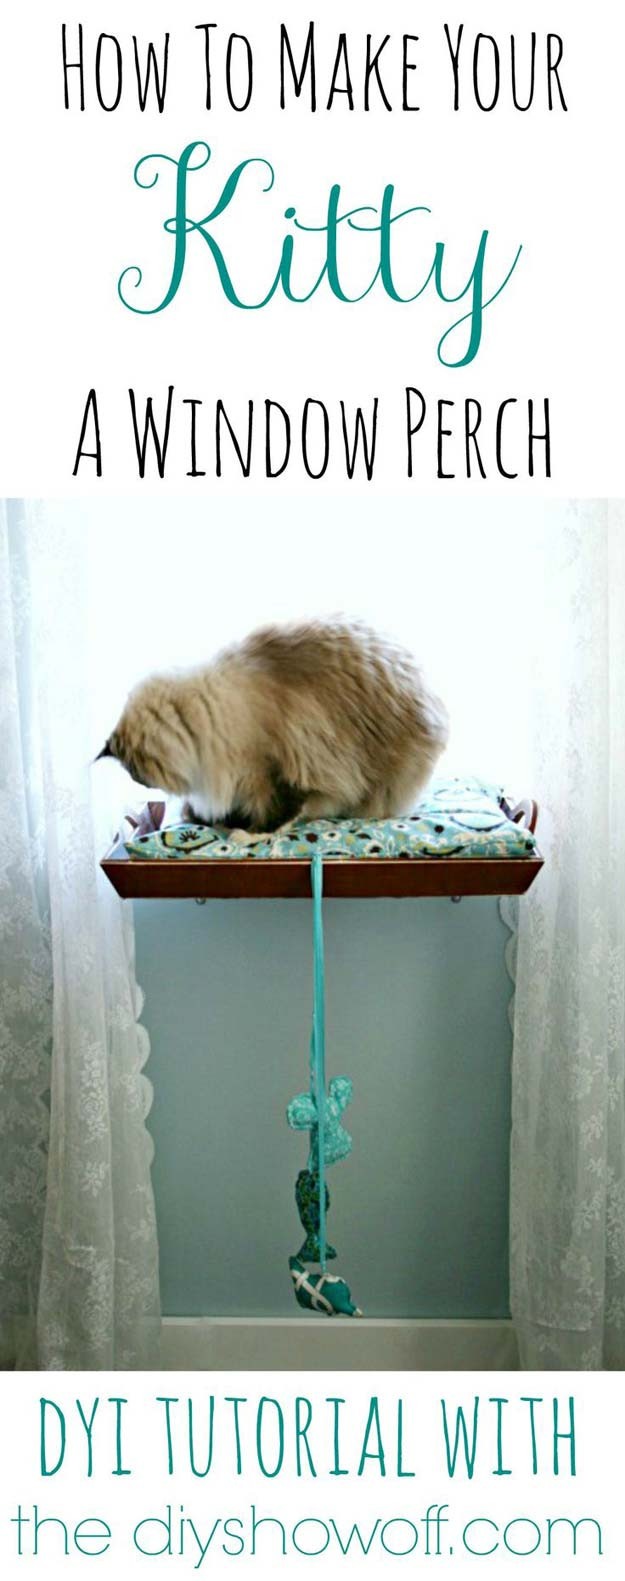 DIY Cat Window Perch
 41 Crafty DIY Projects for Your Pet